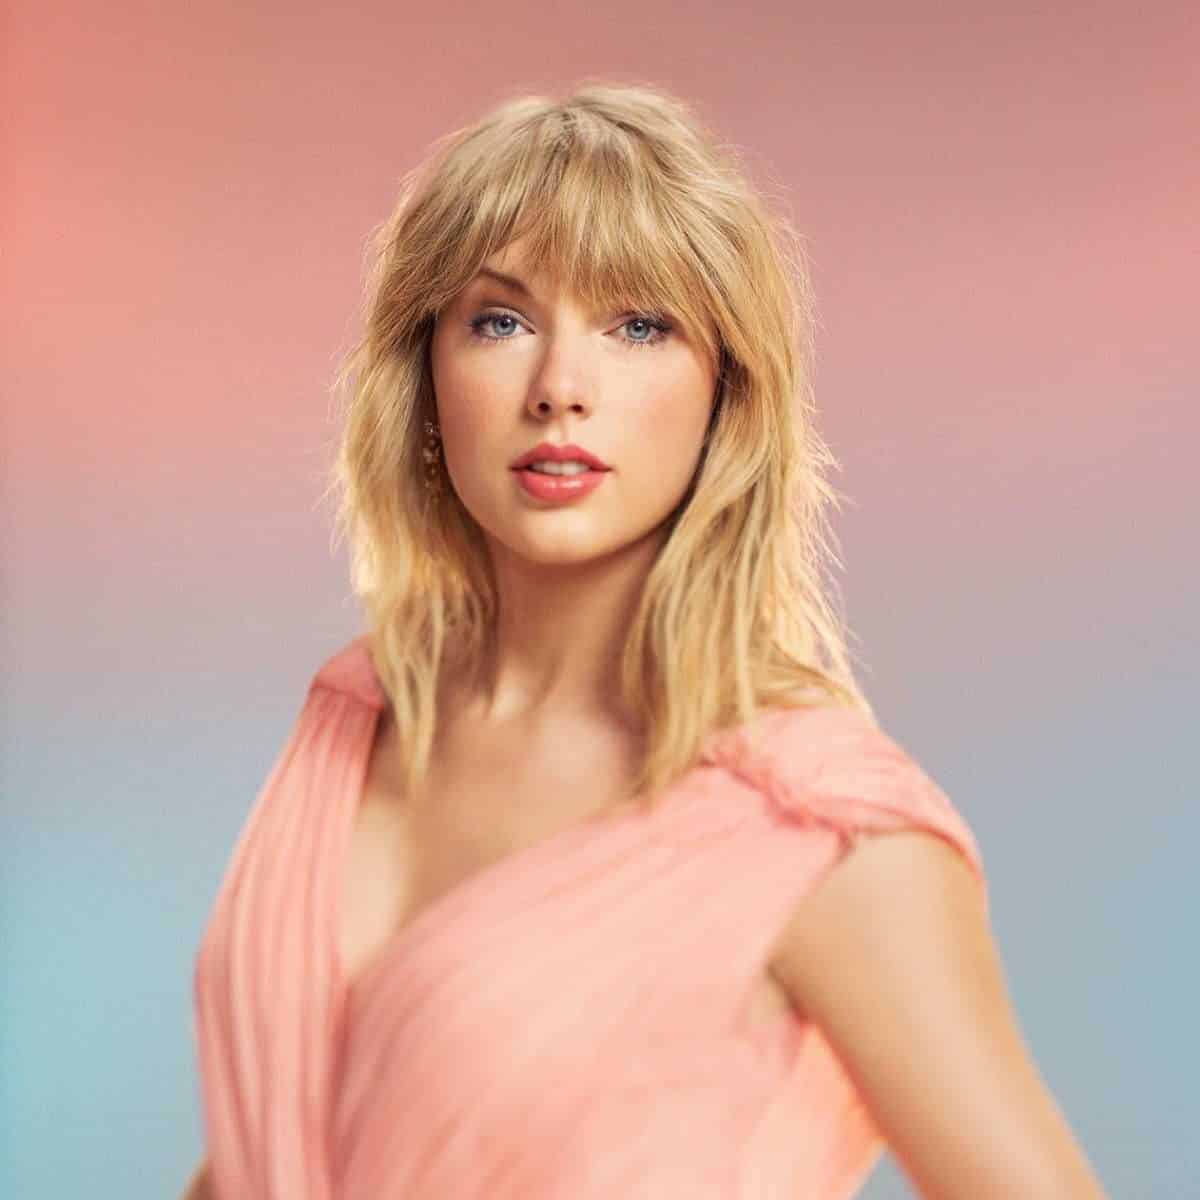 Taylor Swift's Net Worth Career, Age, Biography GuideCrest